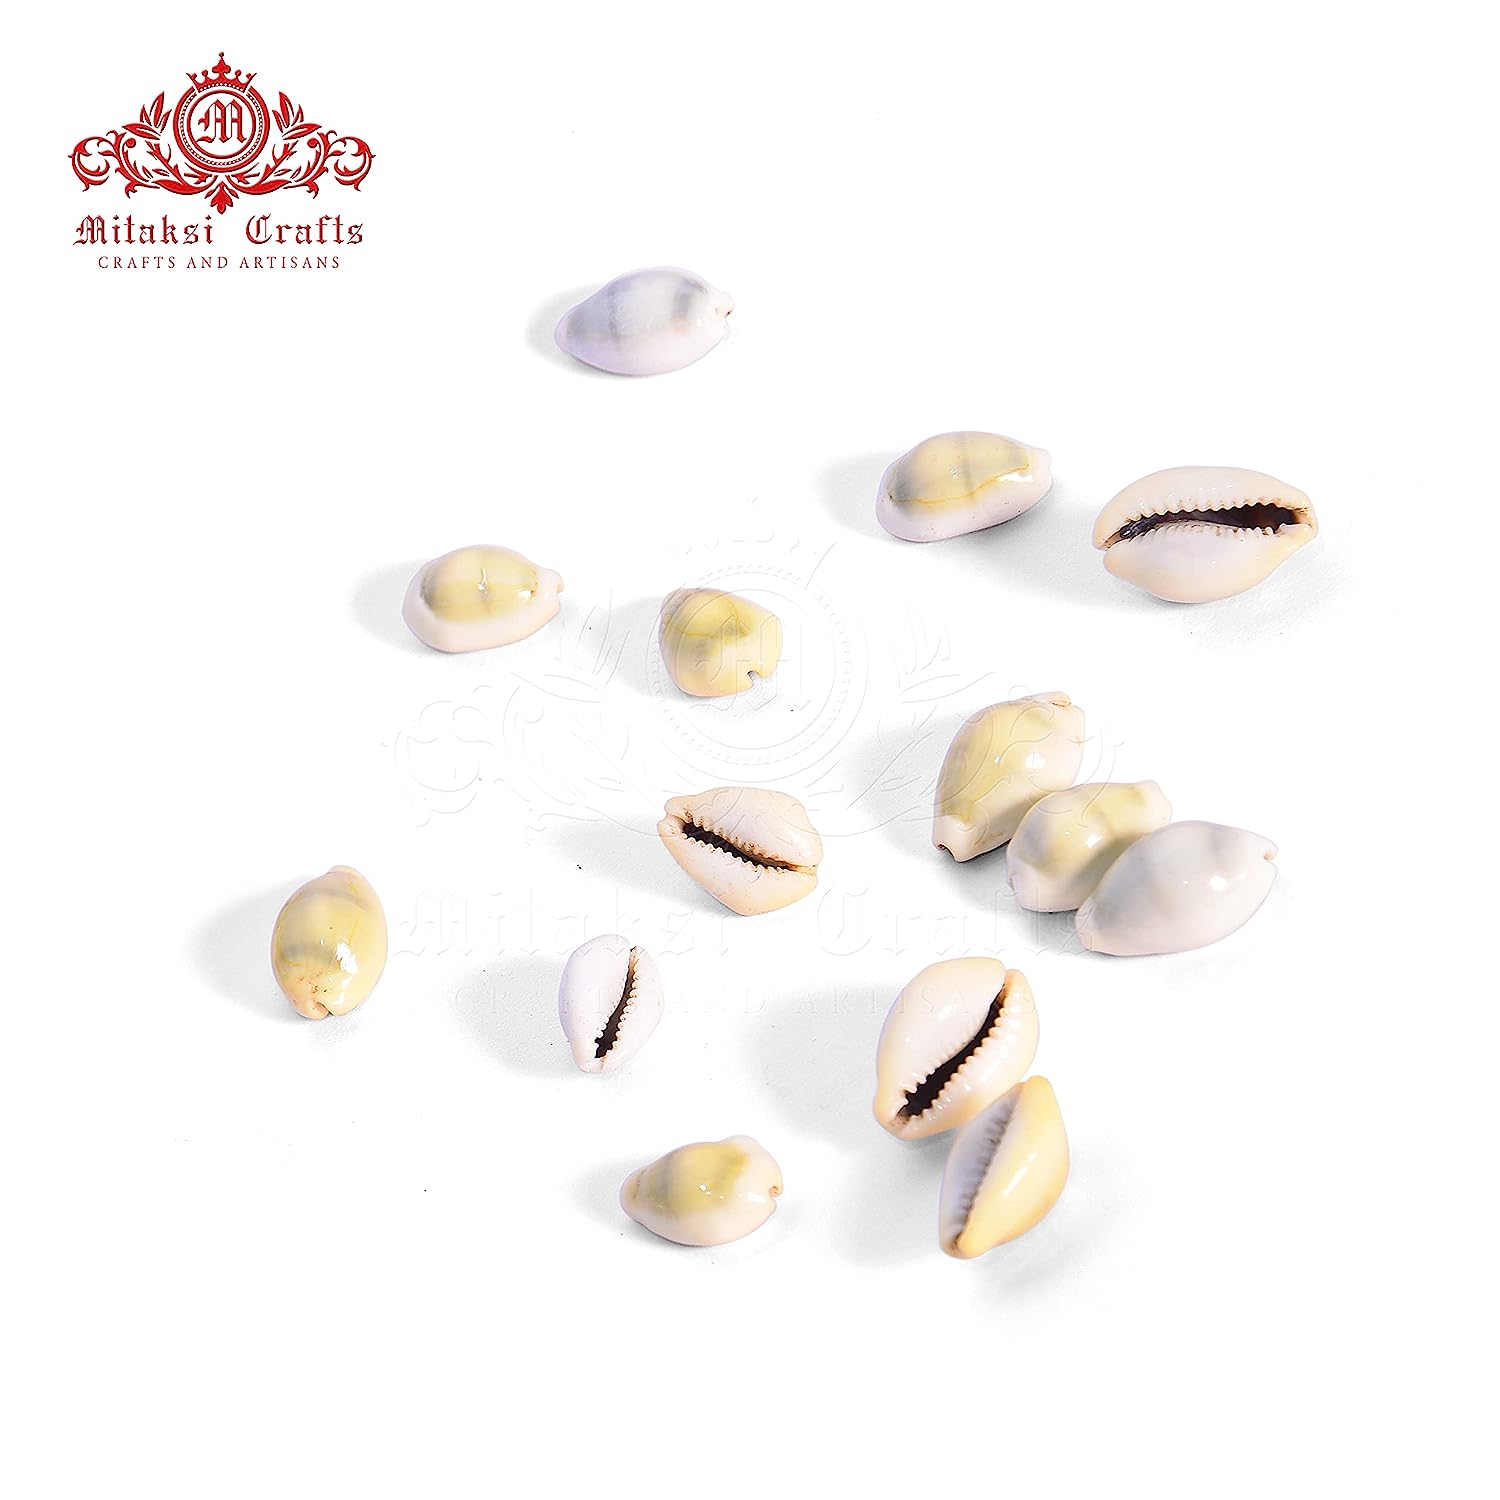 Yellow Cowrie / Kaudi Shells Size – 3 Cms Pack of 50